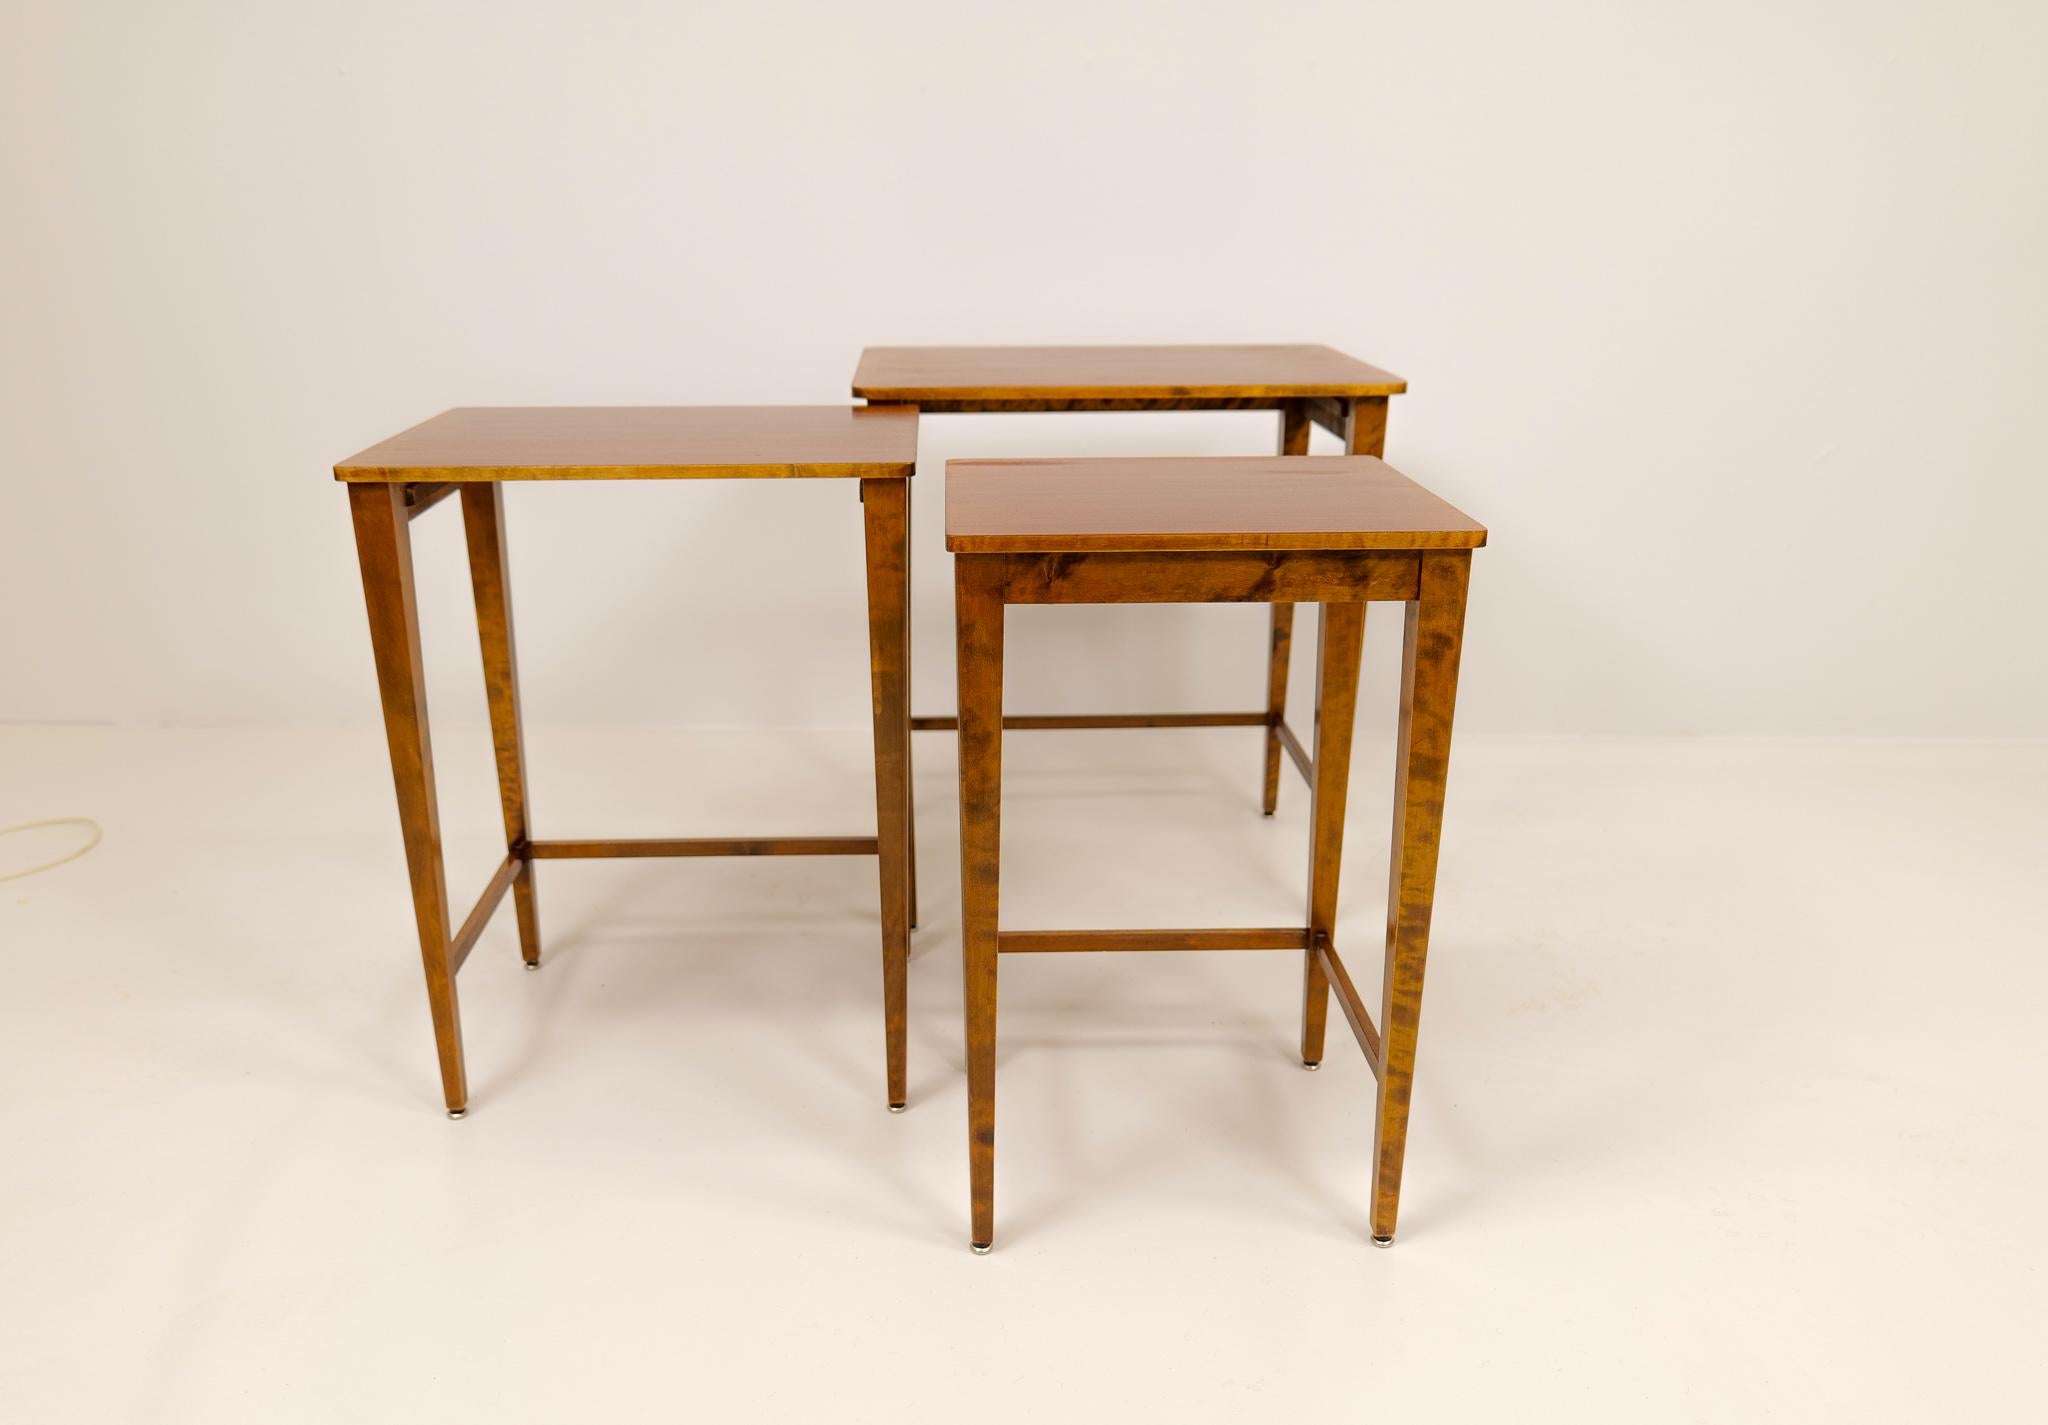 Art Deco Nesting Tables Mahogany and Stained Birch, NK Sweden, 1940s For Sale 7